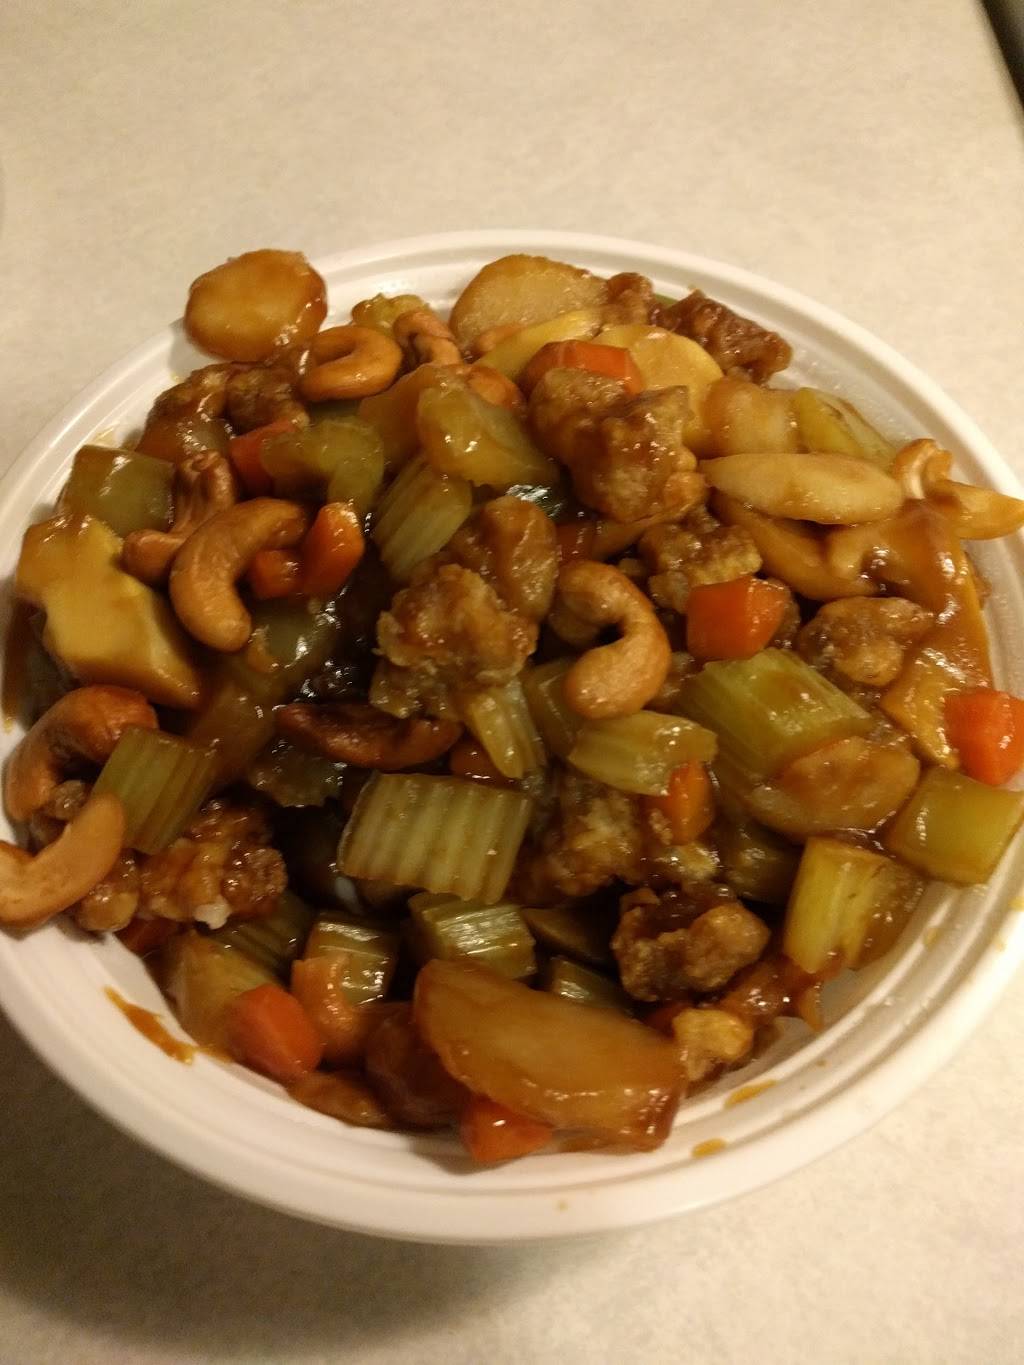 China Queen | meal takeaway | 6941, 1217 Jungermann Rd, St Peters, MO 63376, USA | 6369224368 OR +1 636-922-4368